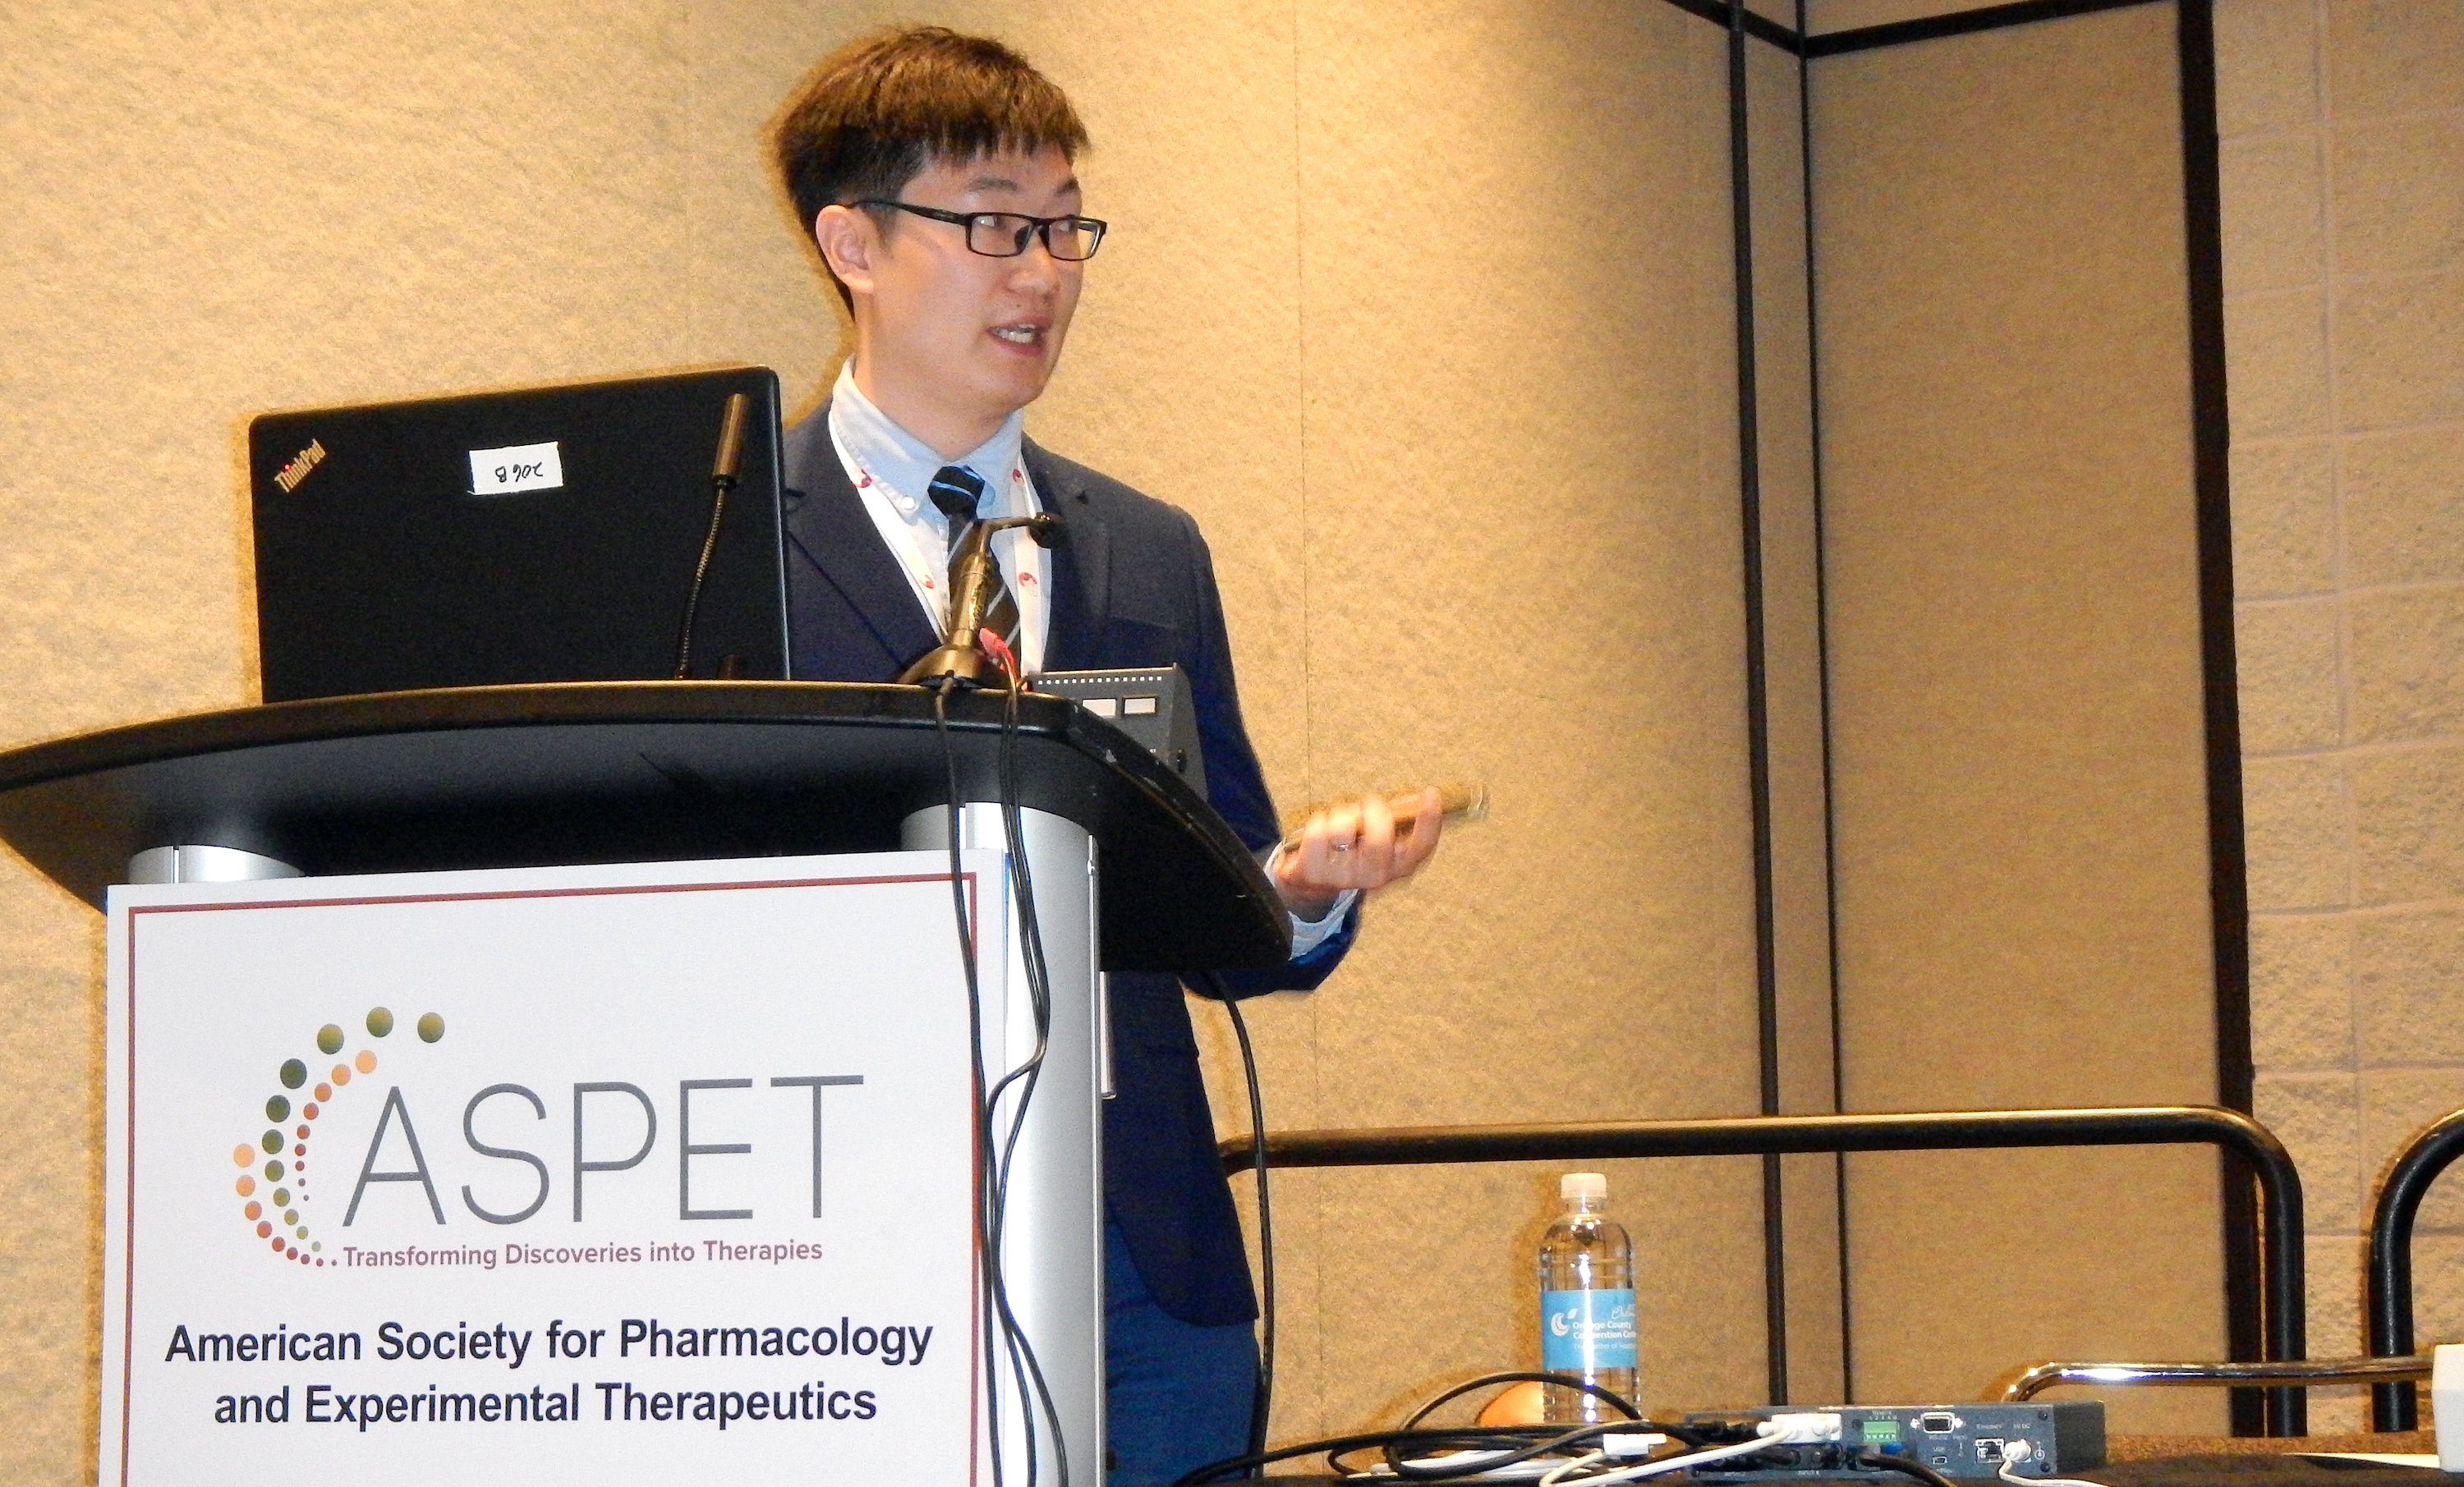 Liming Chen gives oral presentation at an ASPET meeting